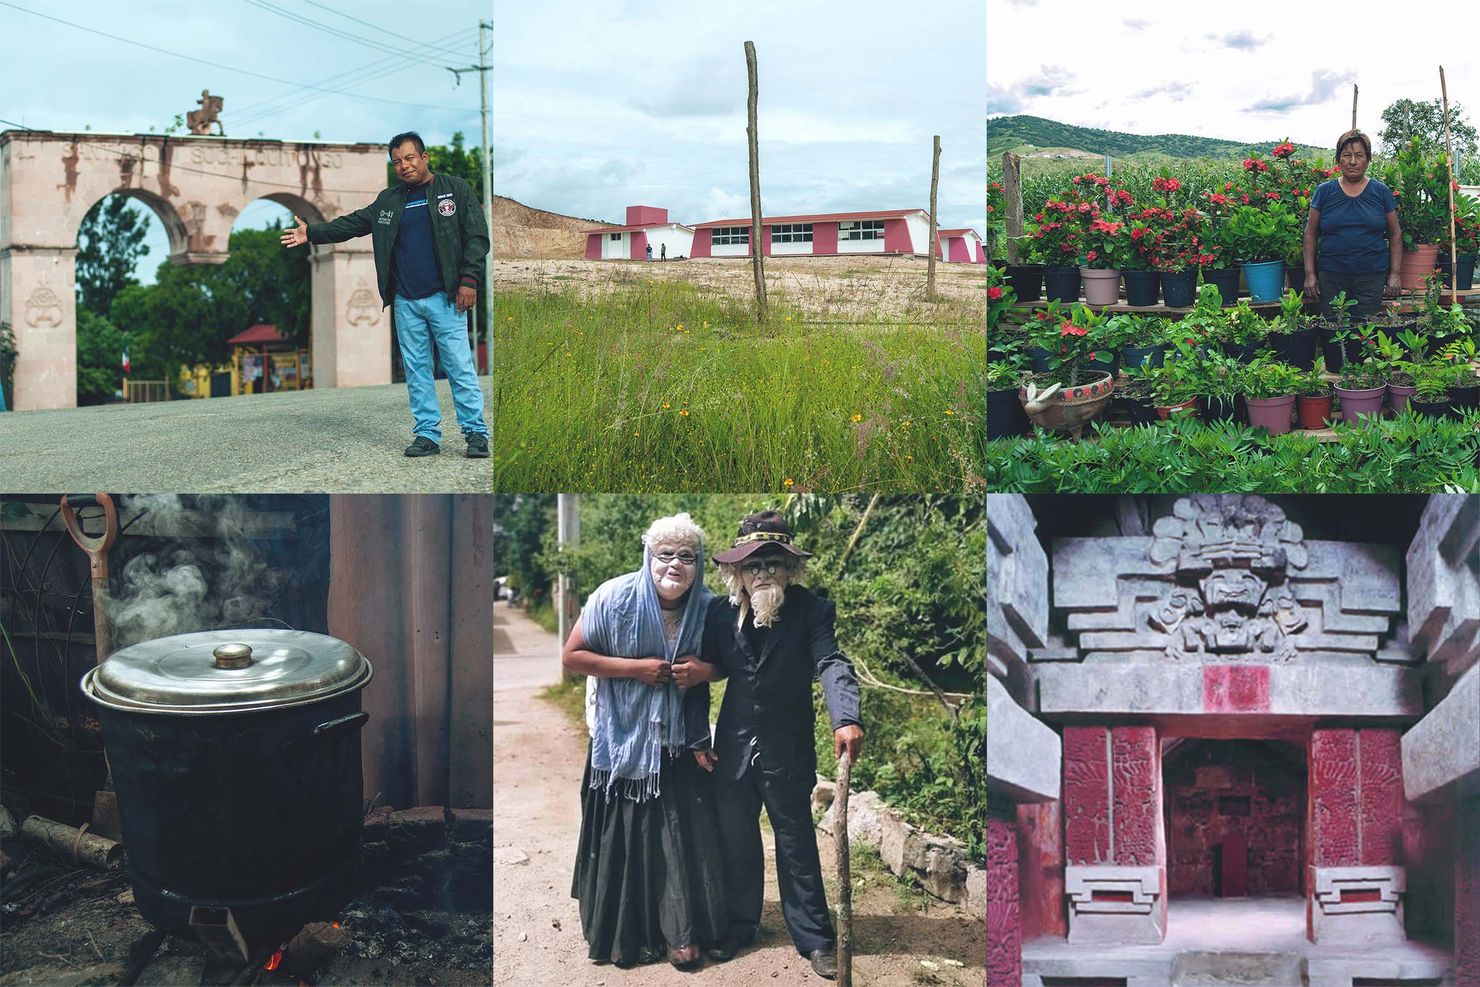 a collage of 6 images showing suchil’s pink quarry arch, jose vasconcelos school, enoc’s mother at her farm, stew cooking in a pot, costumed comparsa members, and cerro de la campana archeological site